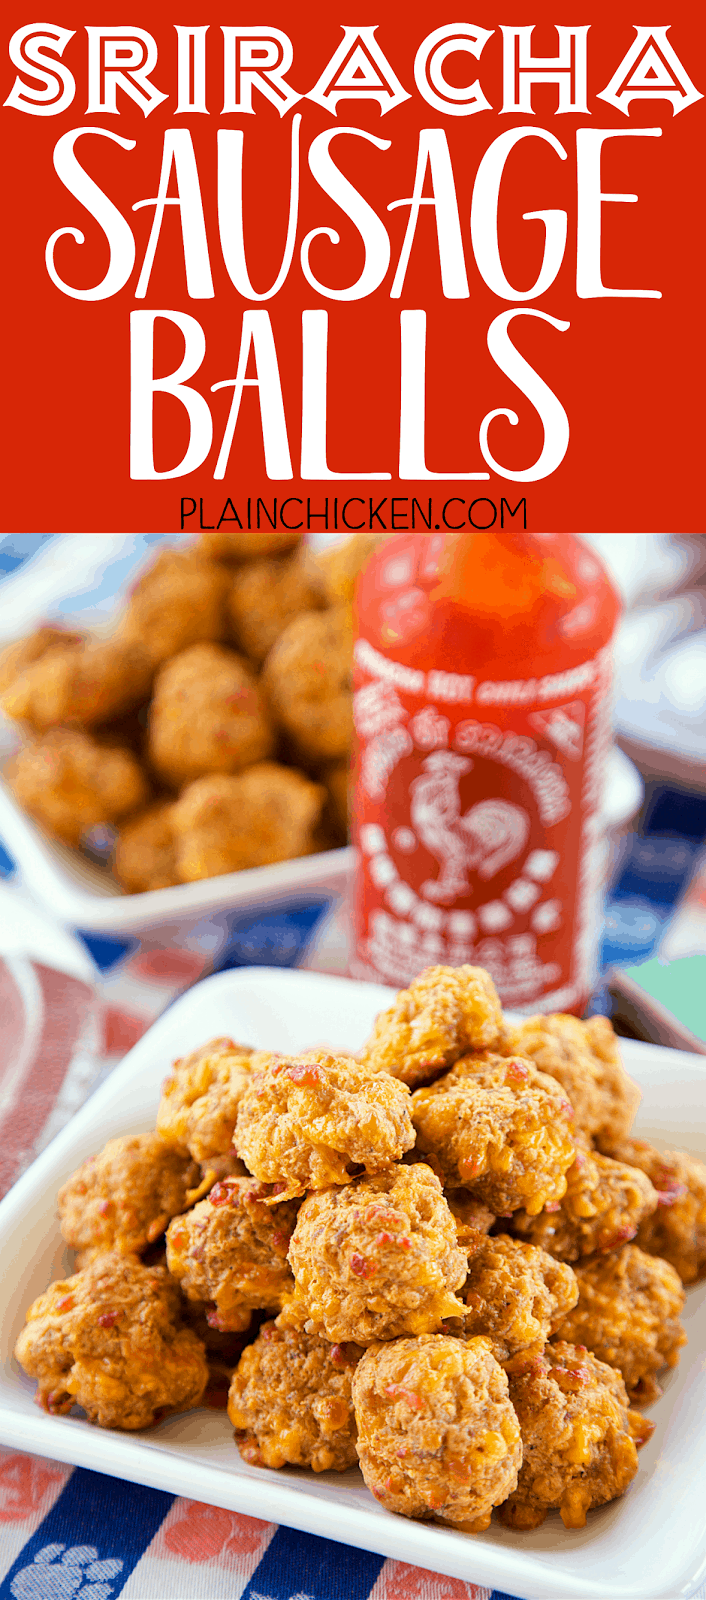 Sriracha Sausage Balls - THE BEST! Great for parties! You can mix together and freezer for later. Sausage, bisquick, cream cheese, cheddar cheese and sriracha. We always have some in the freezer! SO good!